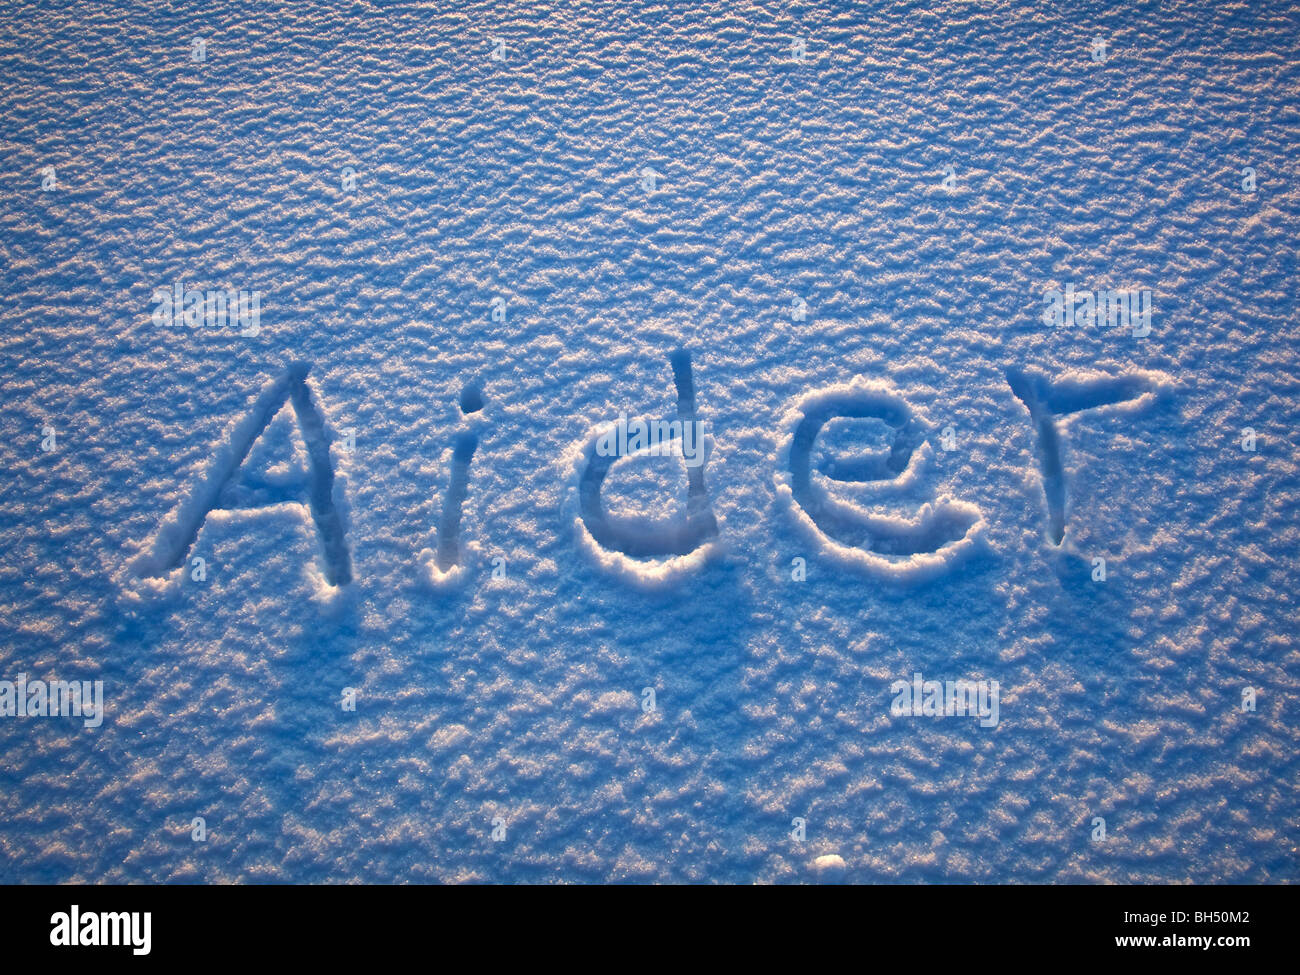 The French word for 'help' spelled out in the snow Stock Photo